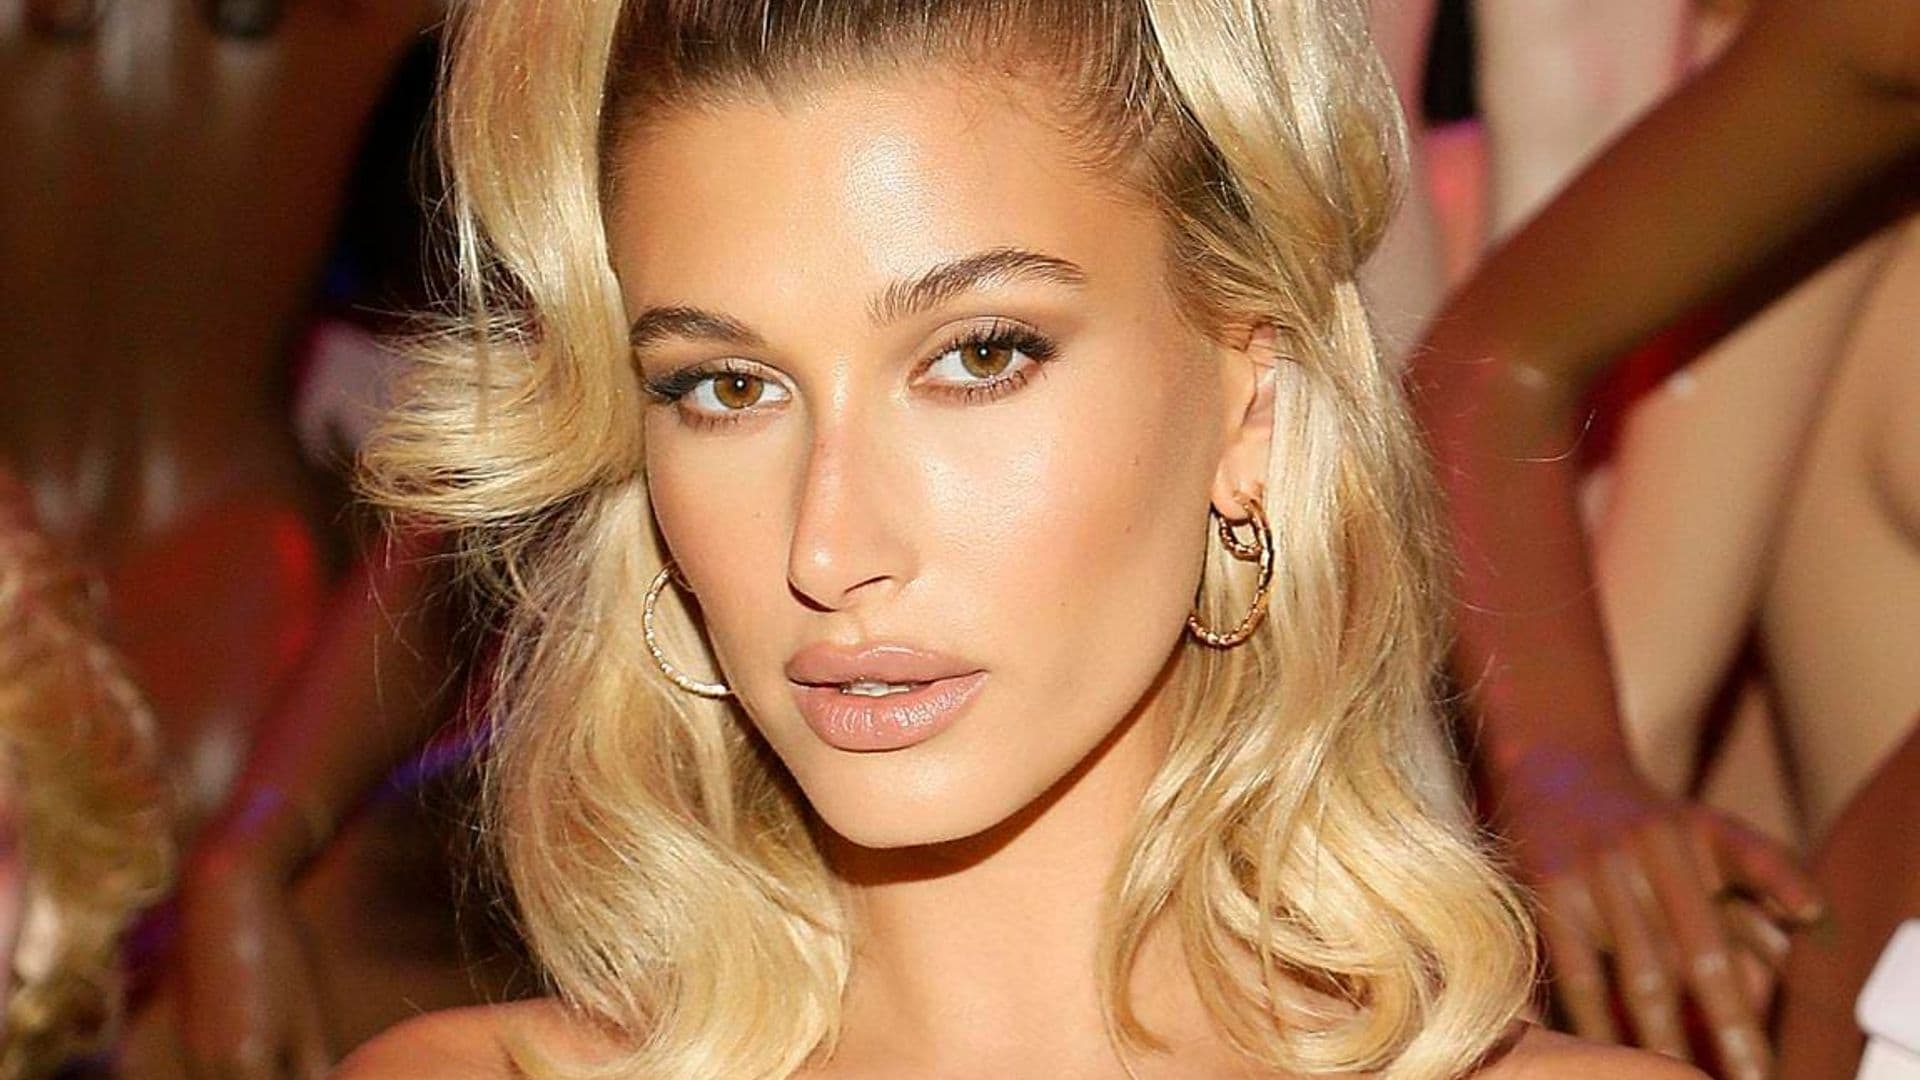 Hailey Bieber revealed her top 5 beauty secrets for sensitive and acne prone skin – and they’re pretty surprising